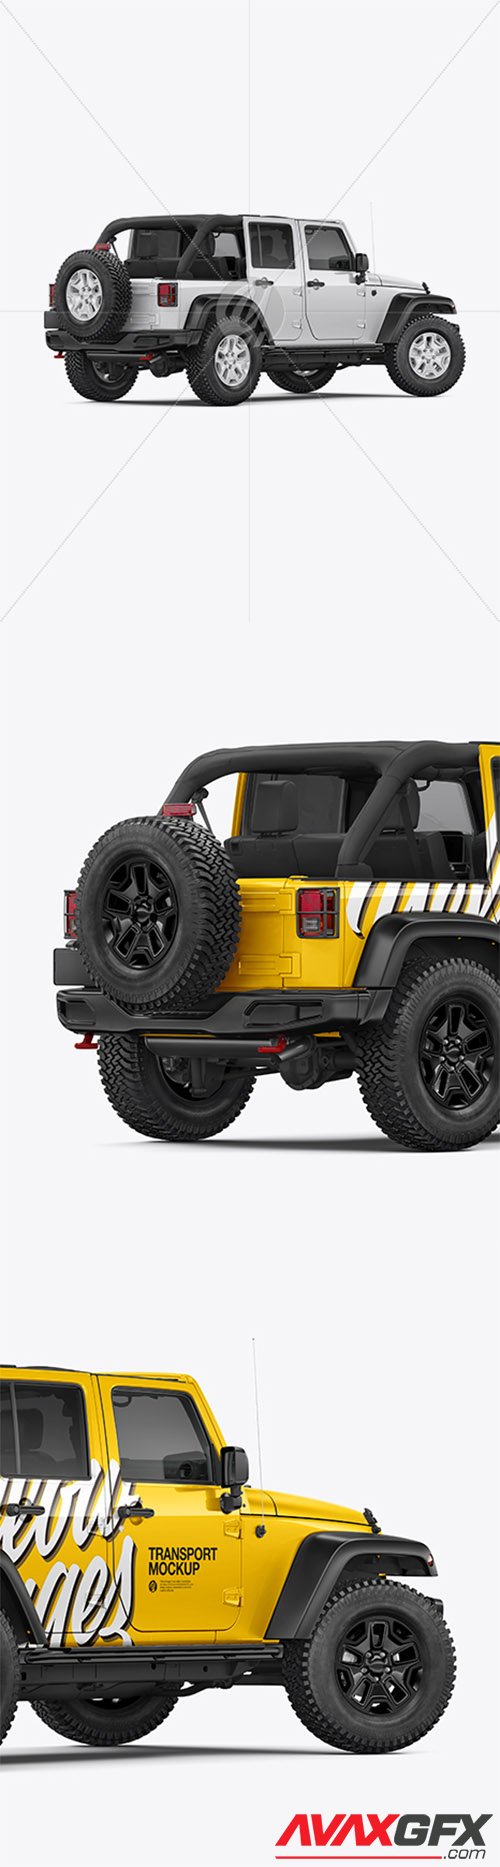 Off-Road SUV Open Roof Mockup - Back Half Side View 41105